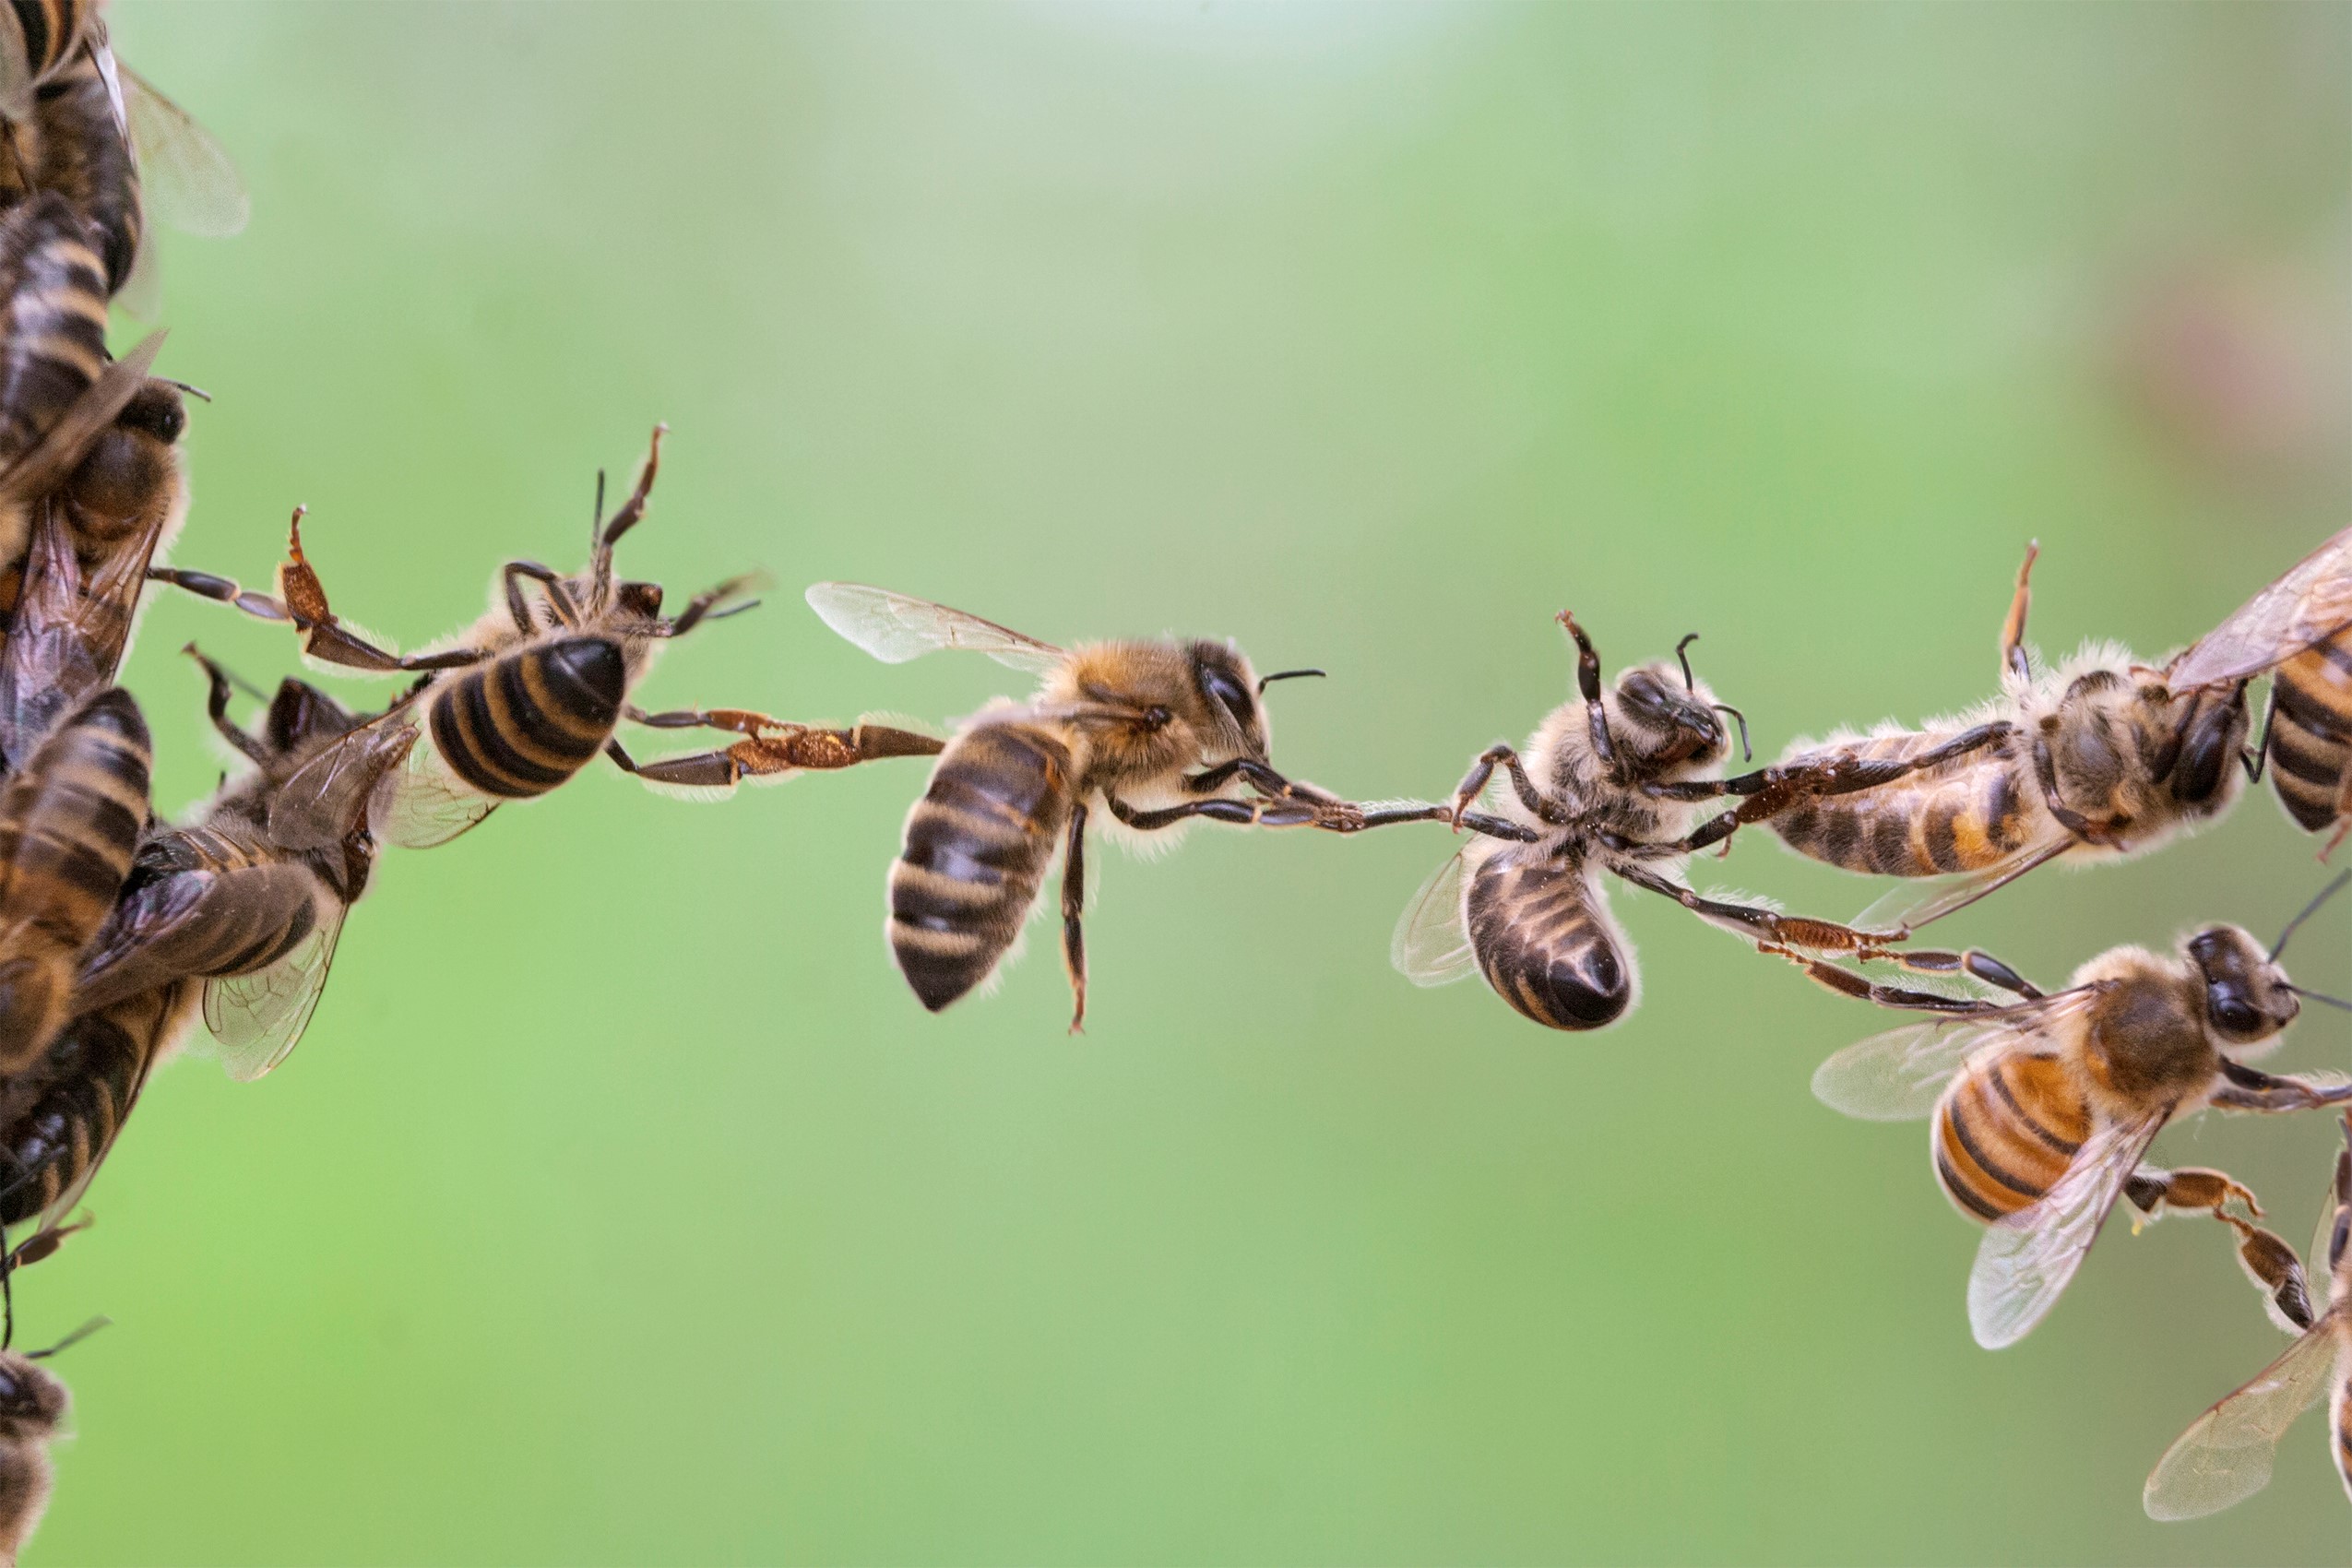 Group of bees working together